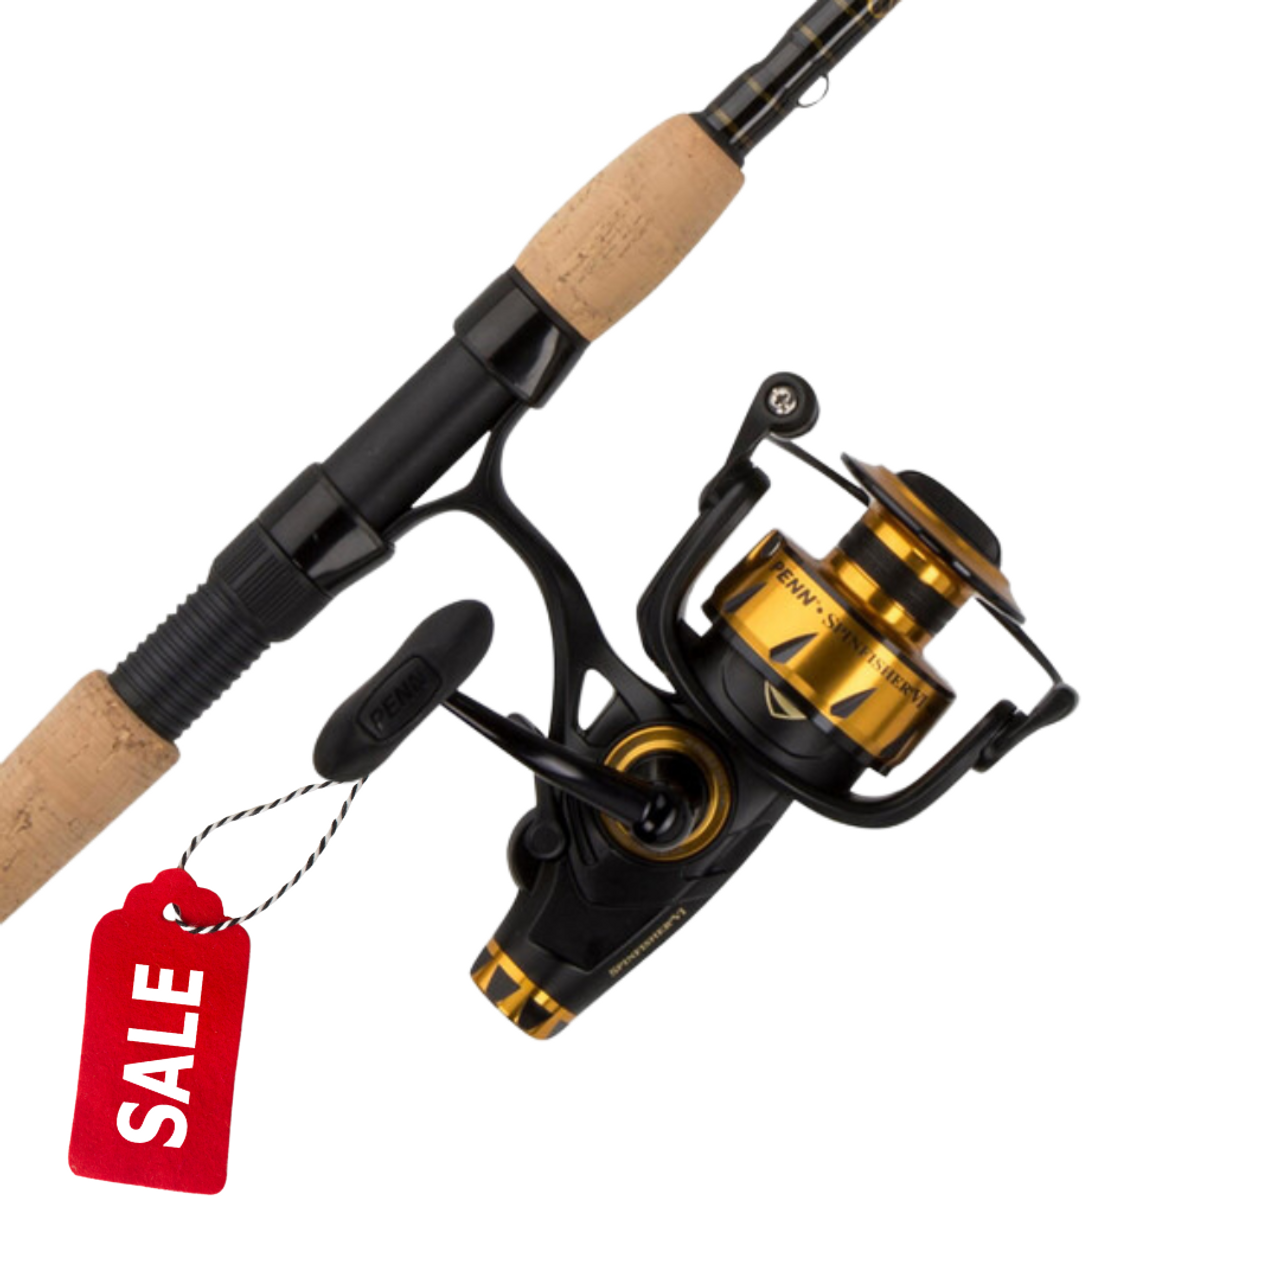 Trolling Combo Saltwater Fishing Rod & Reel Combos for sale